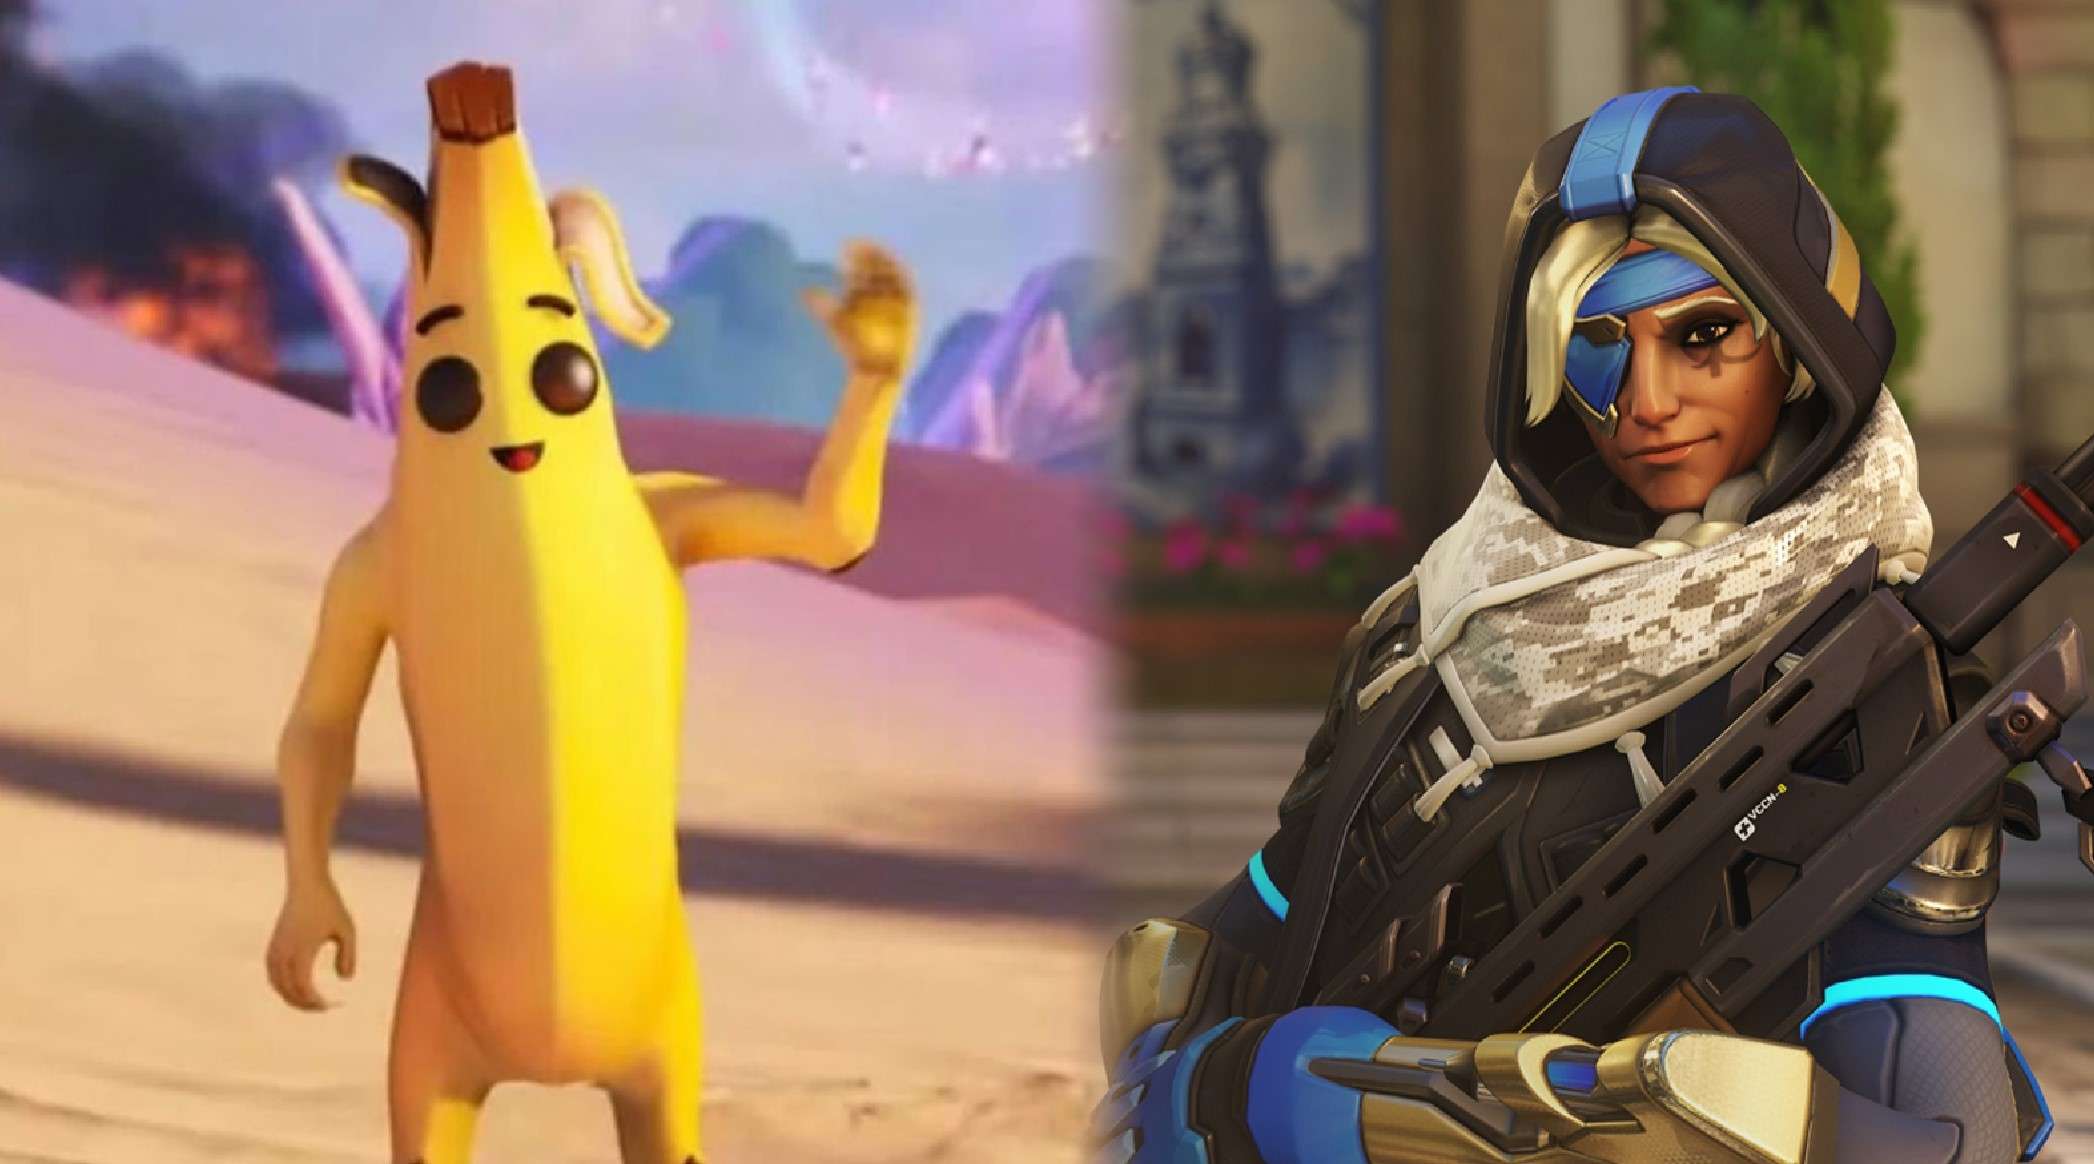 Fortnite Peely skin next to Ana in Overwatch 2